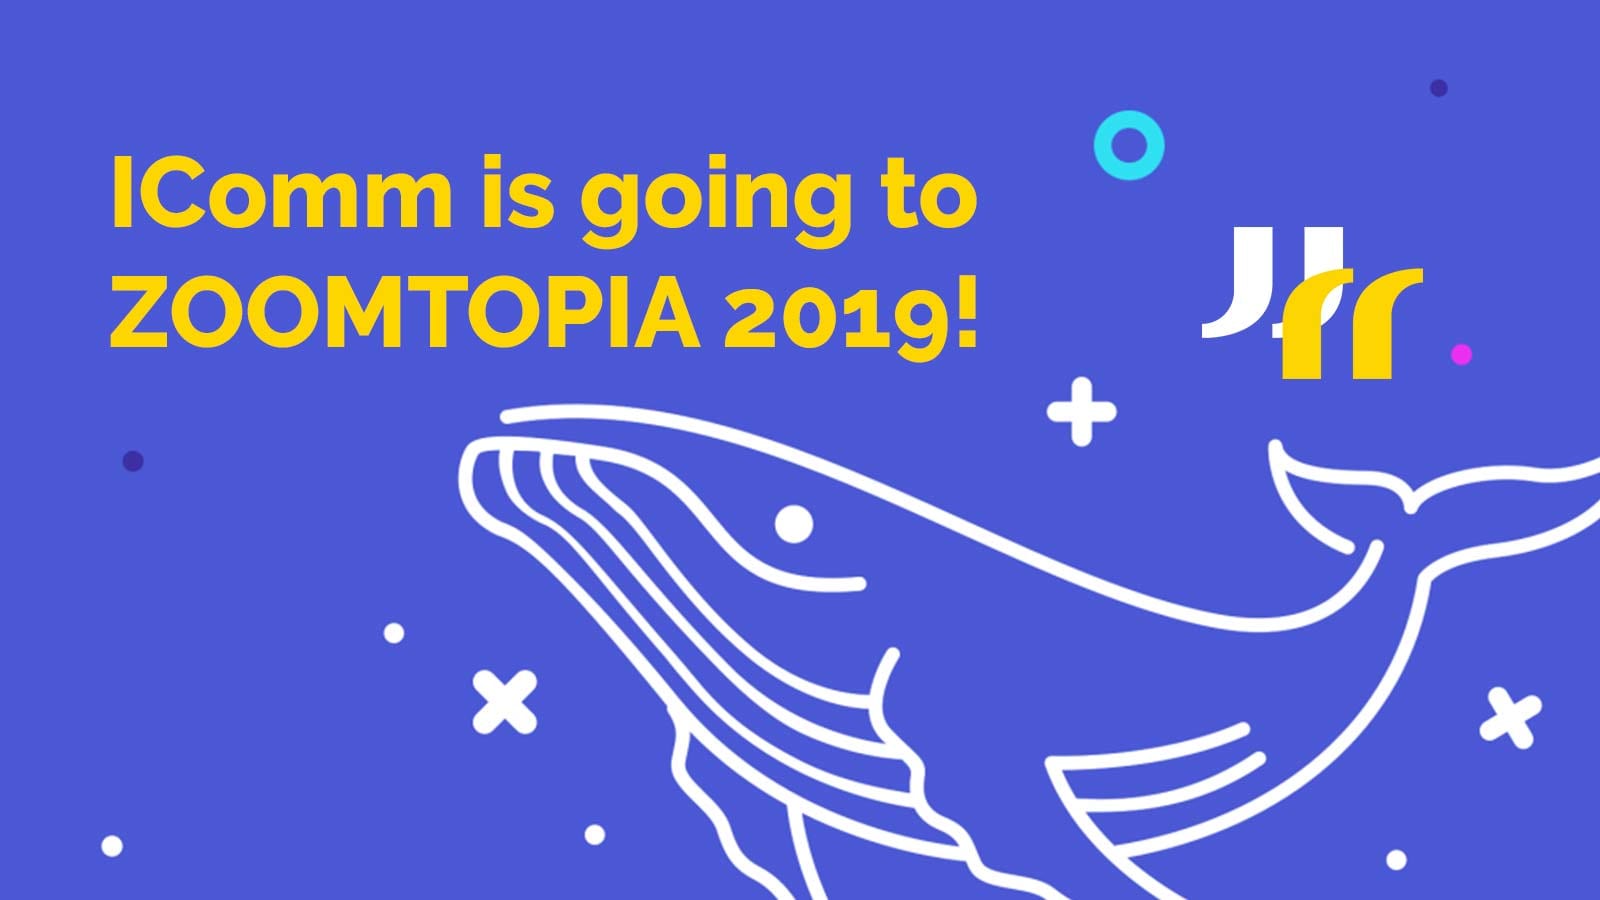 purple banner with outline of cartoon humpback whale, IComm logo mark, and text "IComm is going to ZOOMTOPIA 2019!"